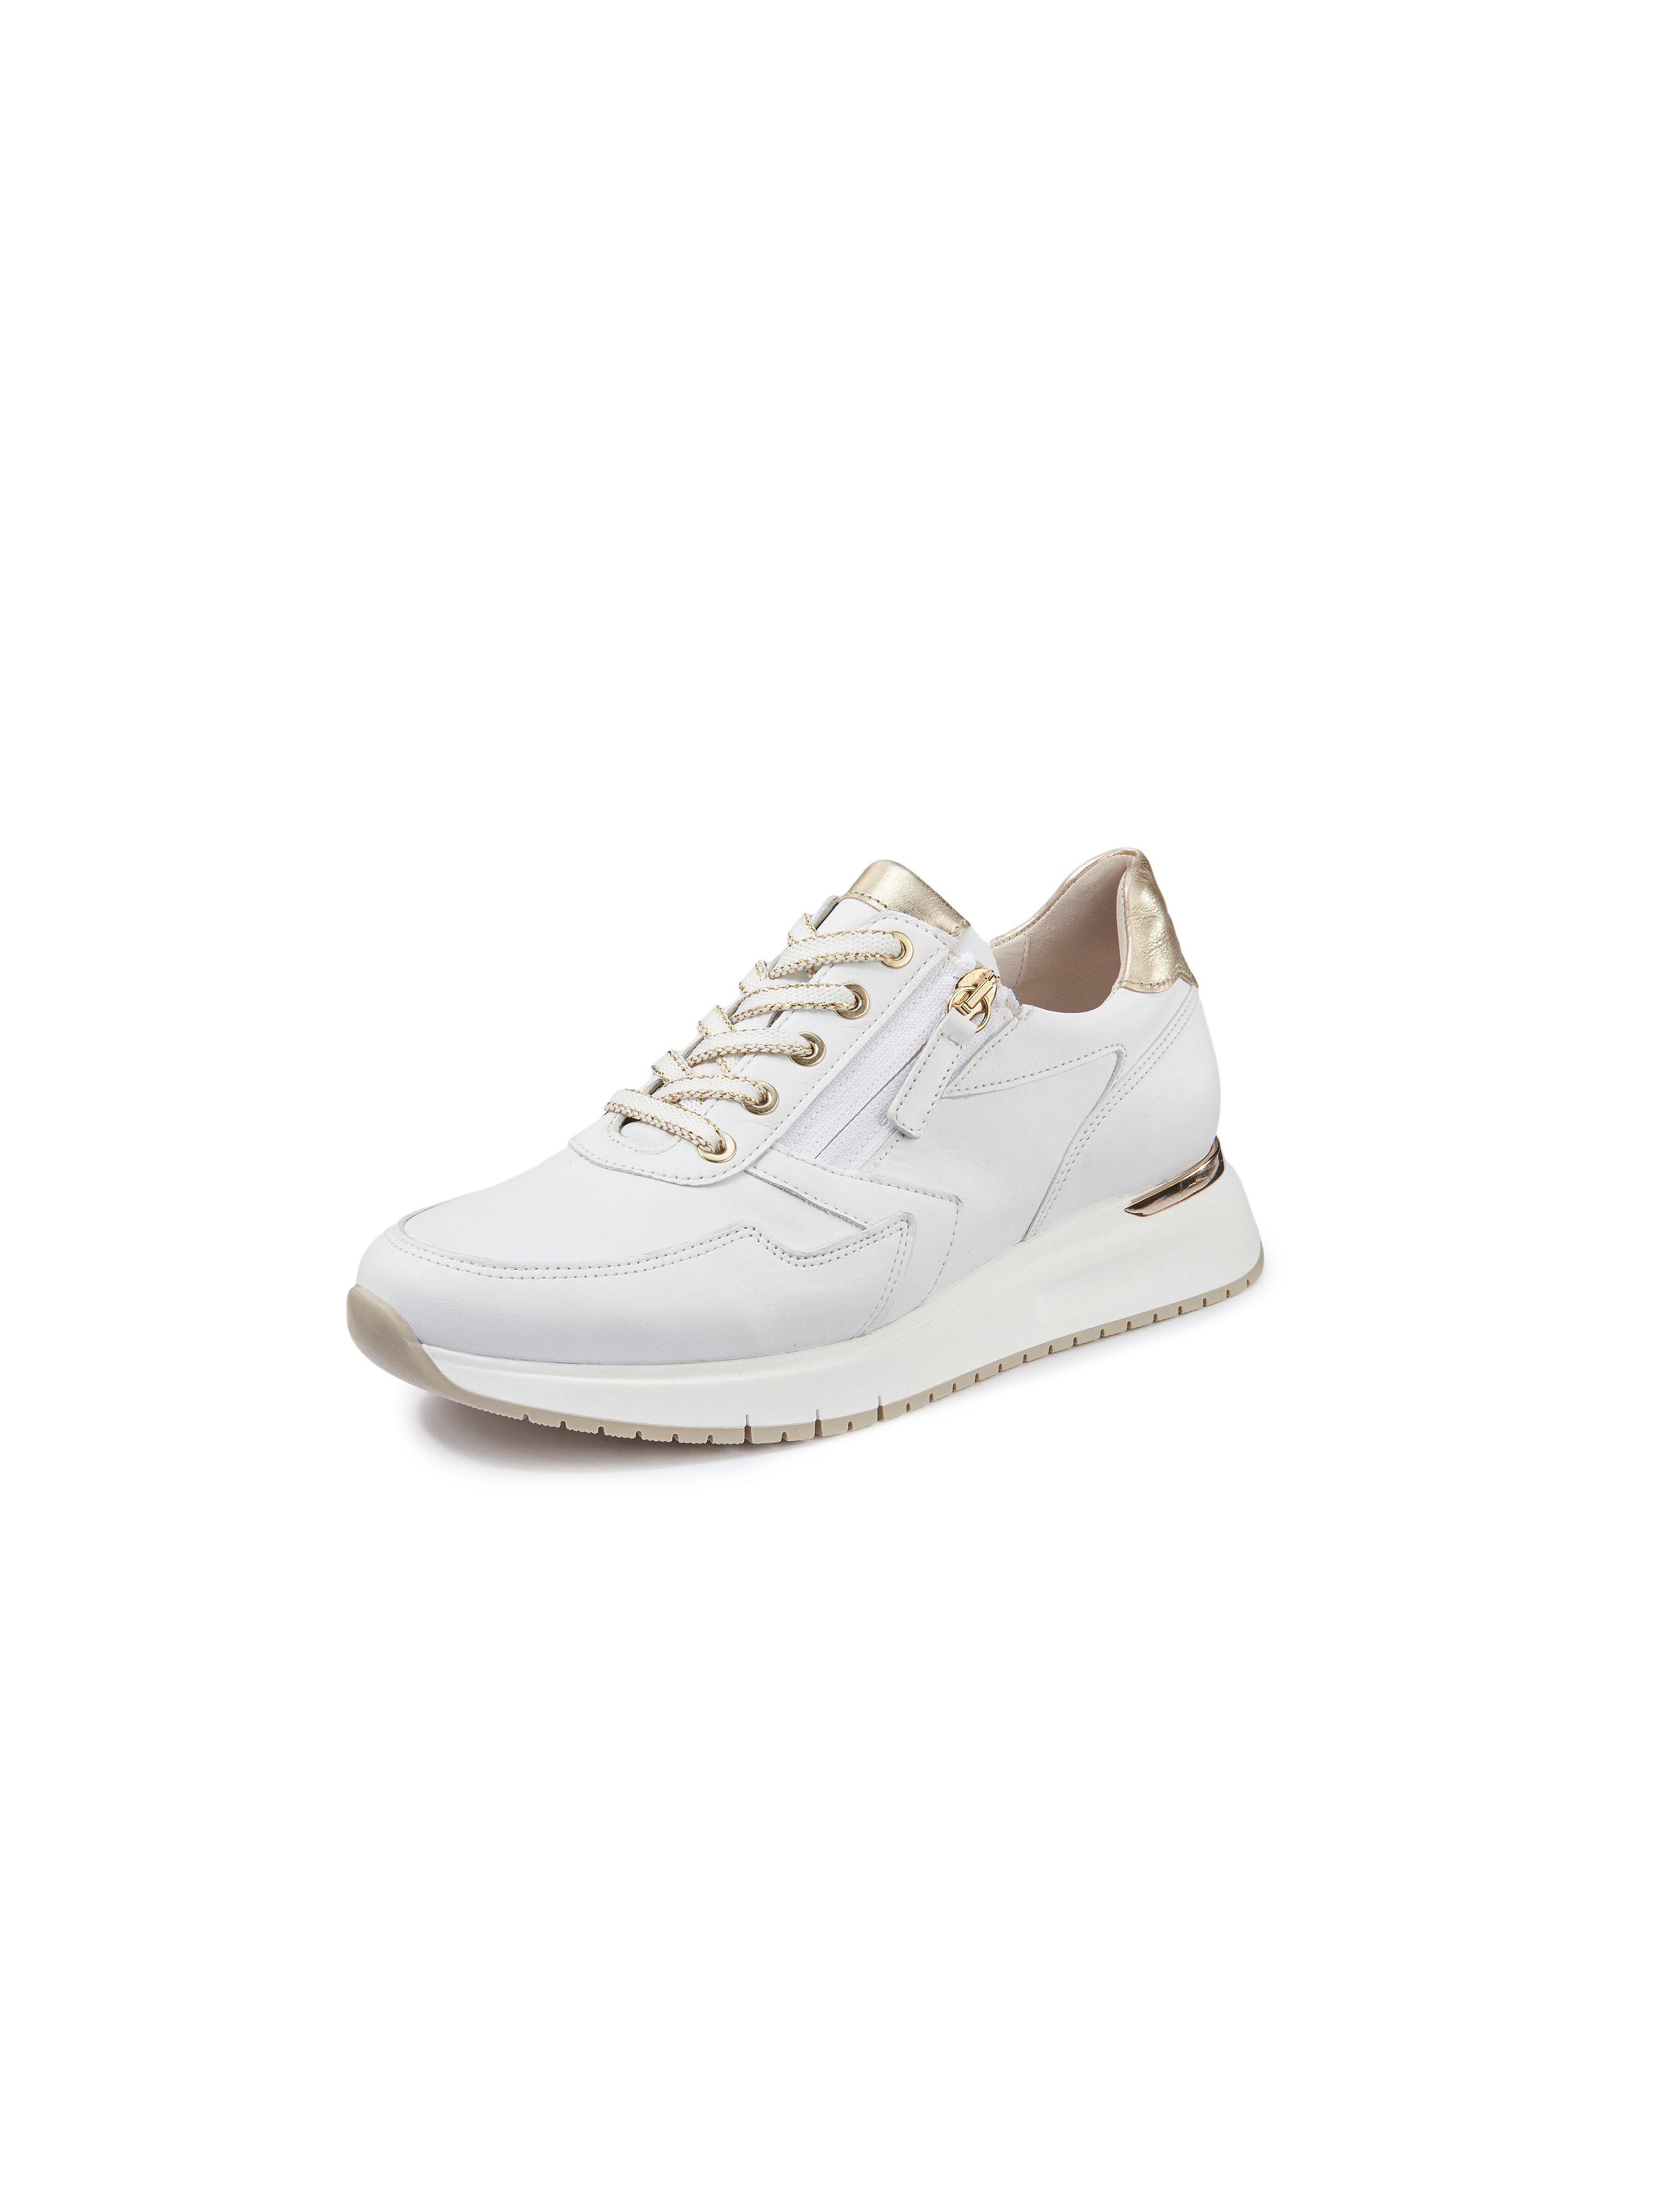 Sneakers in calf leather Gabor Comfort white